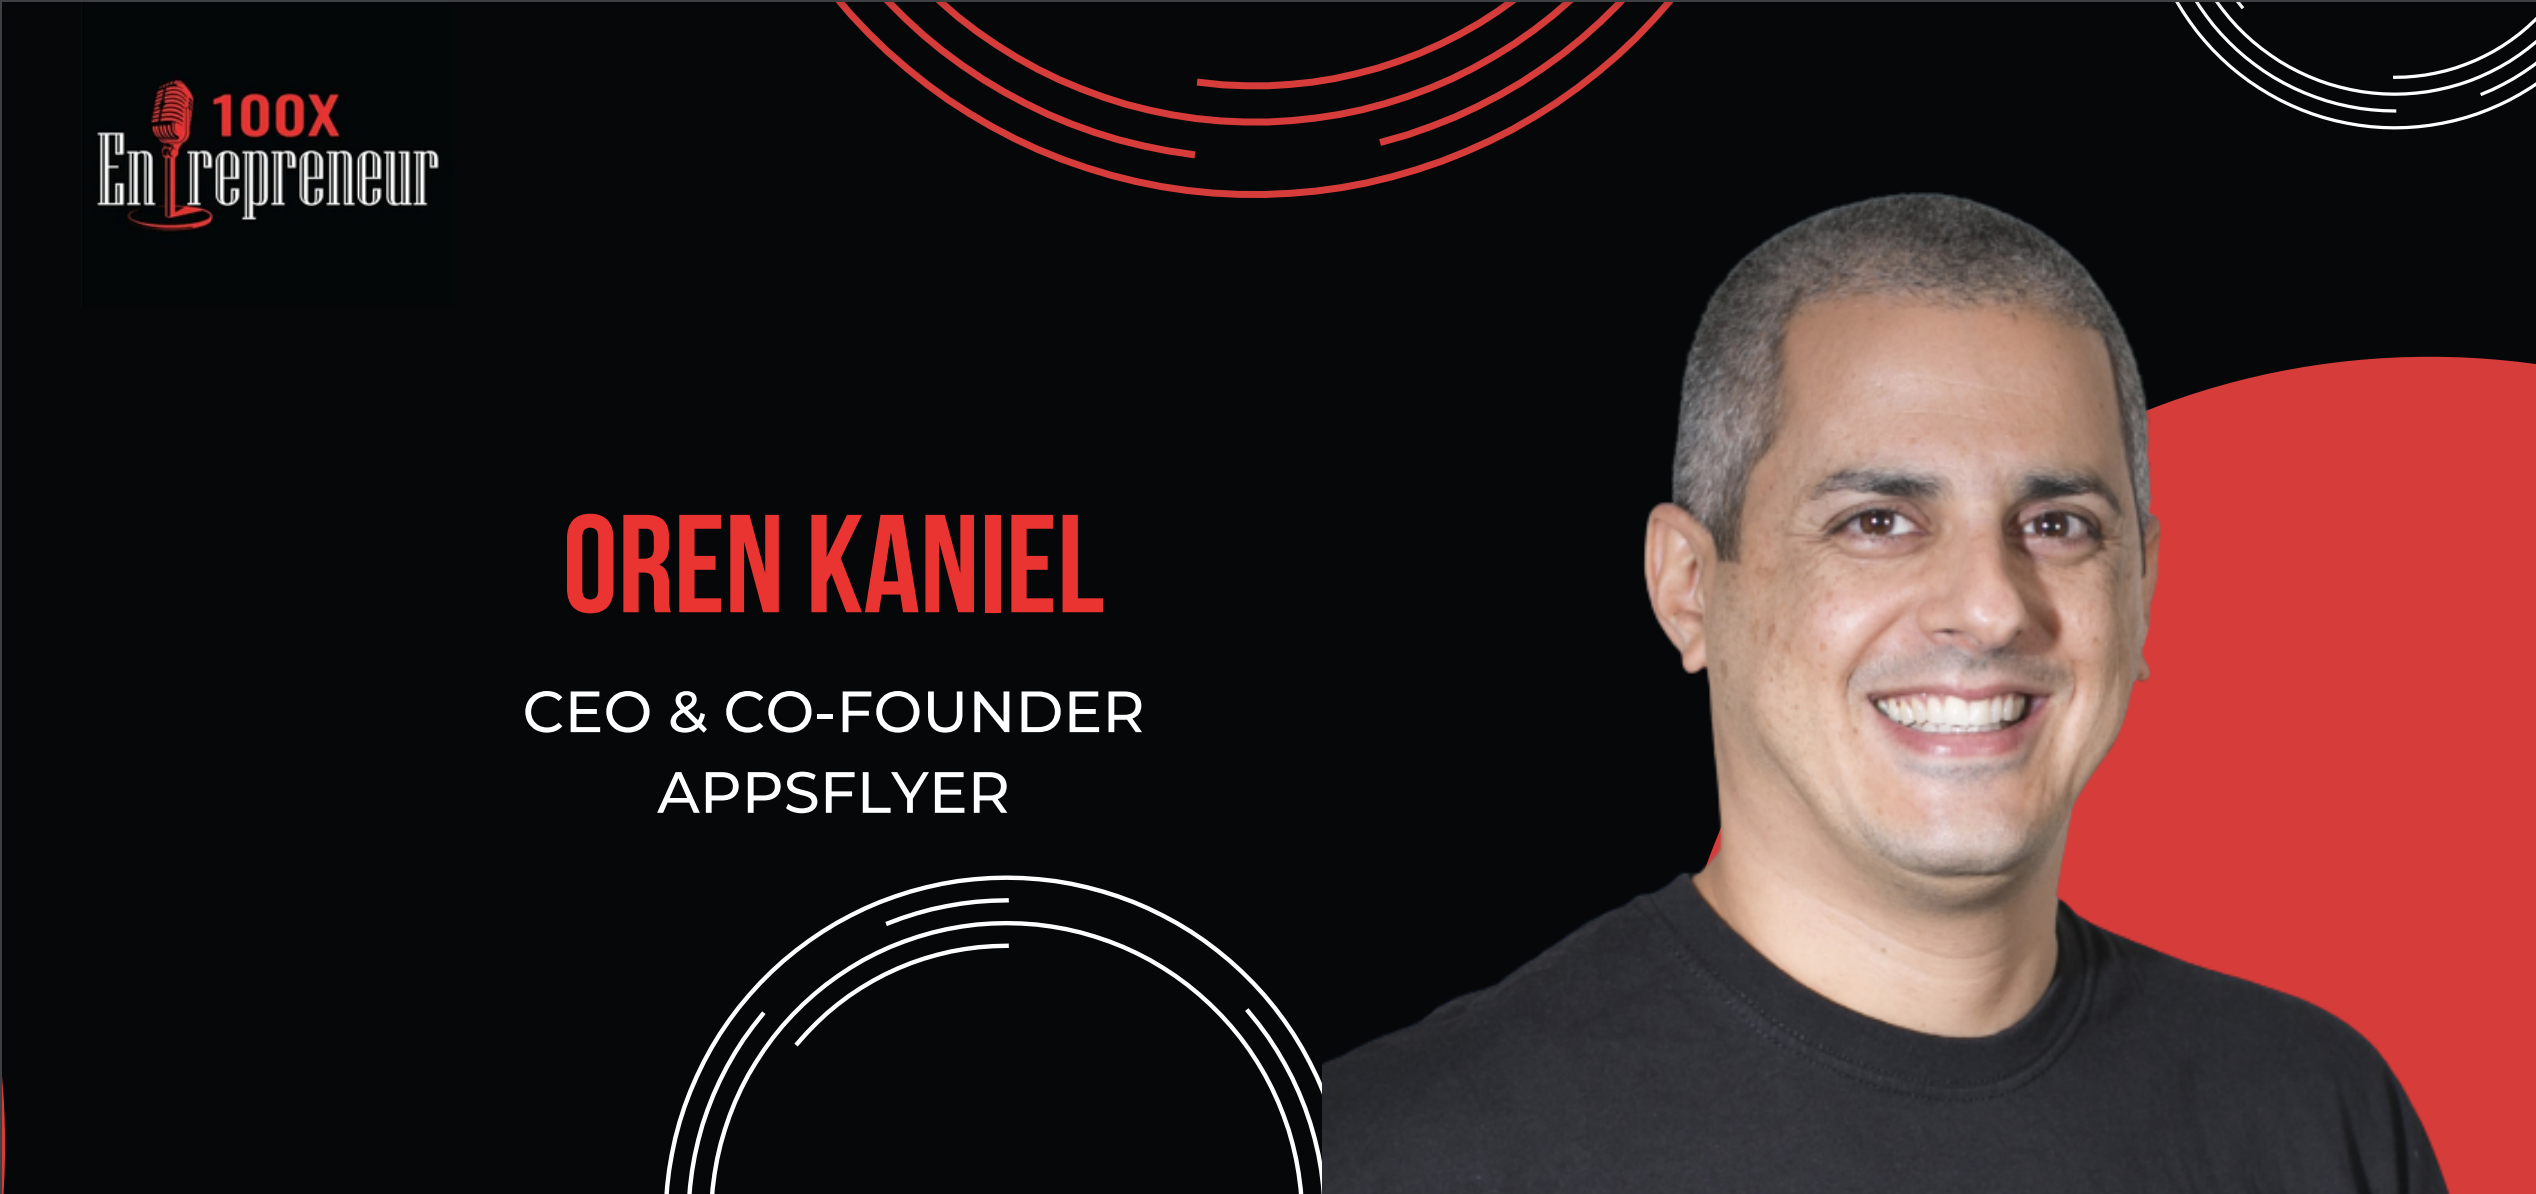 AppsFlyer’s Oren Kaniel on what it takes to build a great product